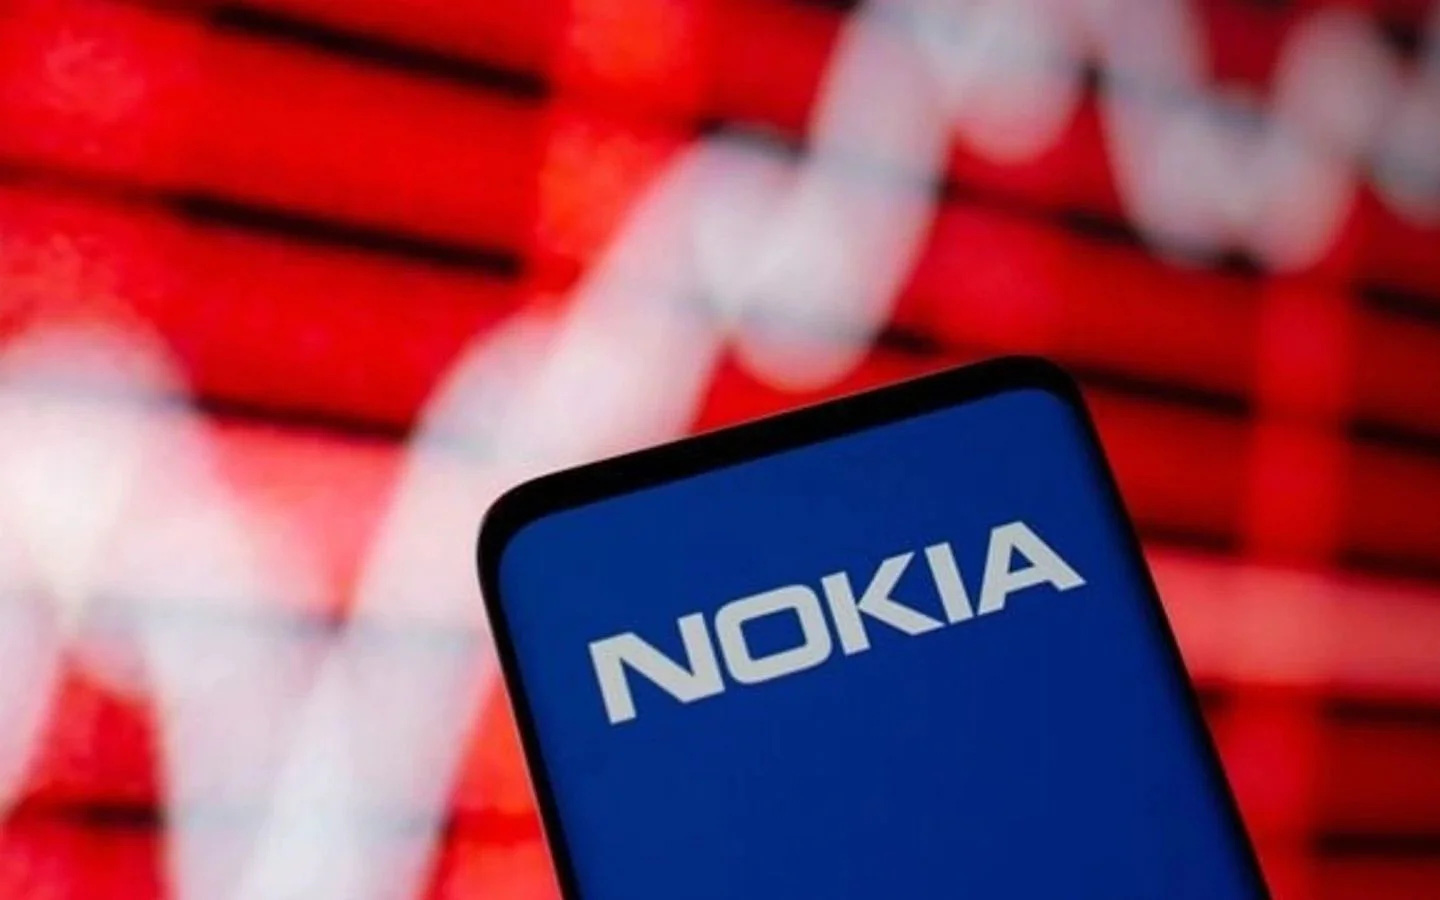 Shock Nokia officially stopped doing business in Russia